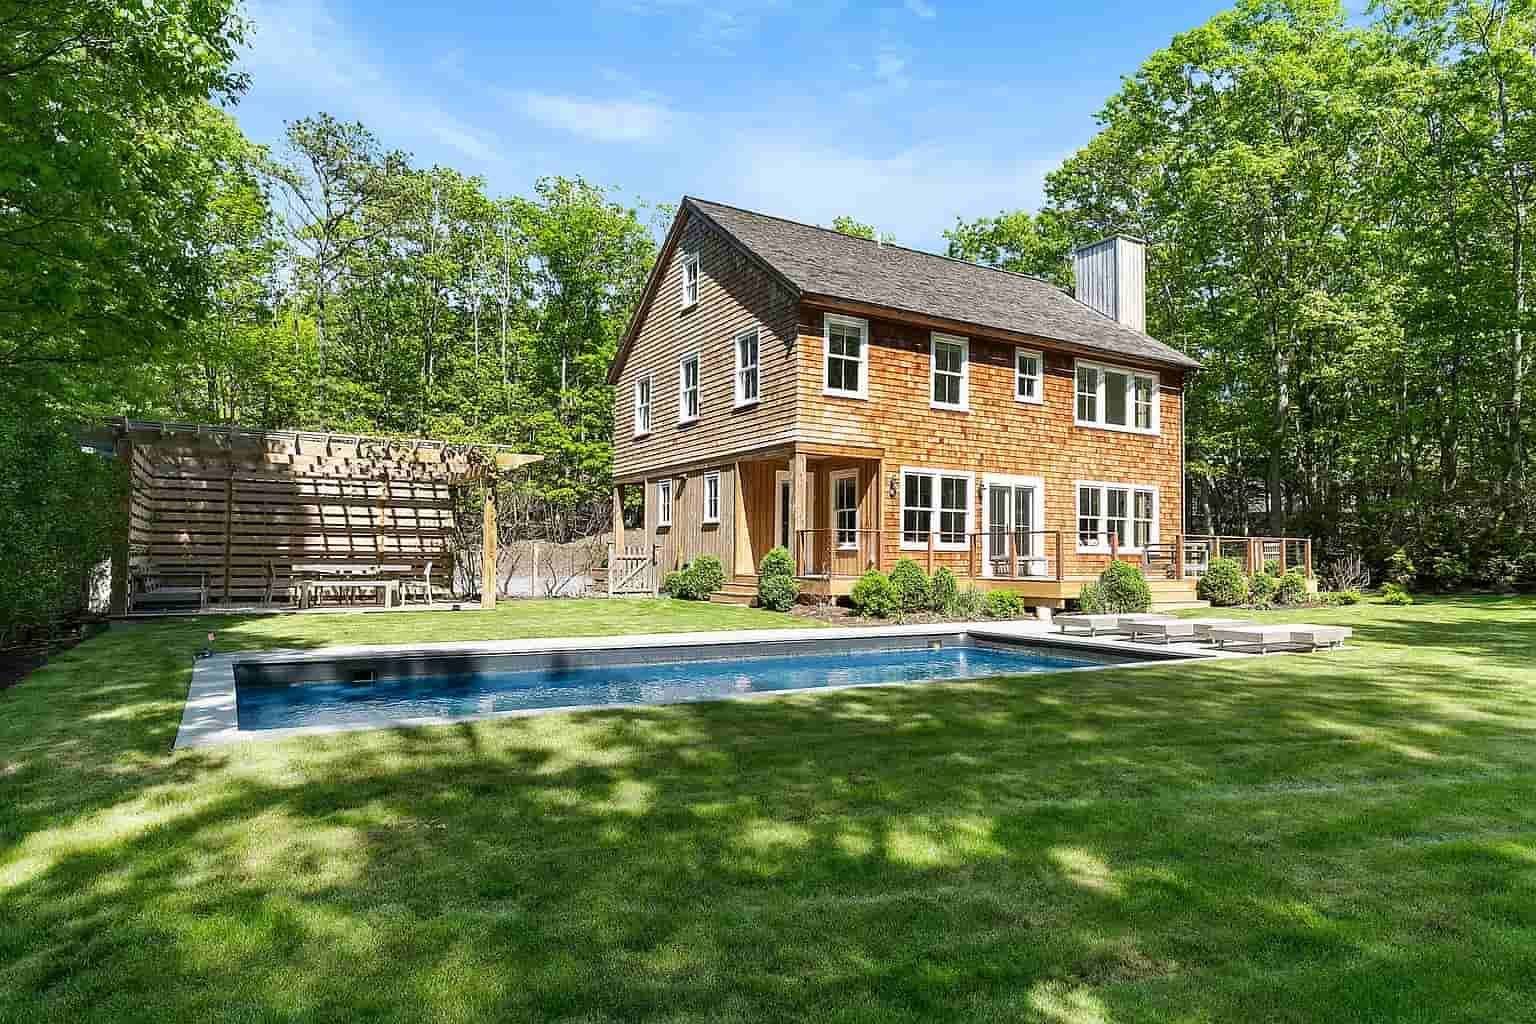 Turnkey in Sag Harbor Minutes to Village and Beach